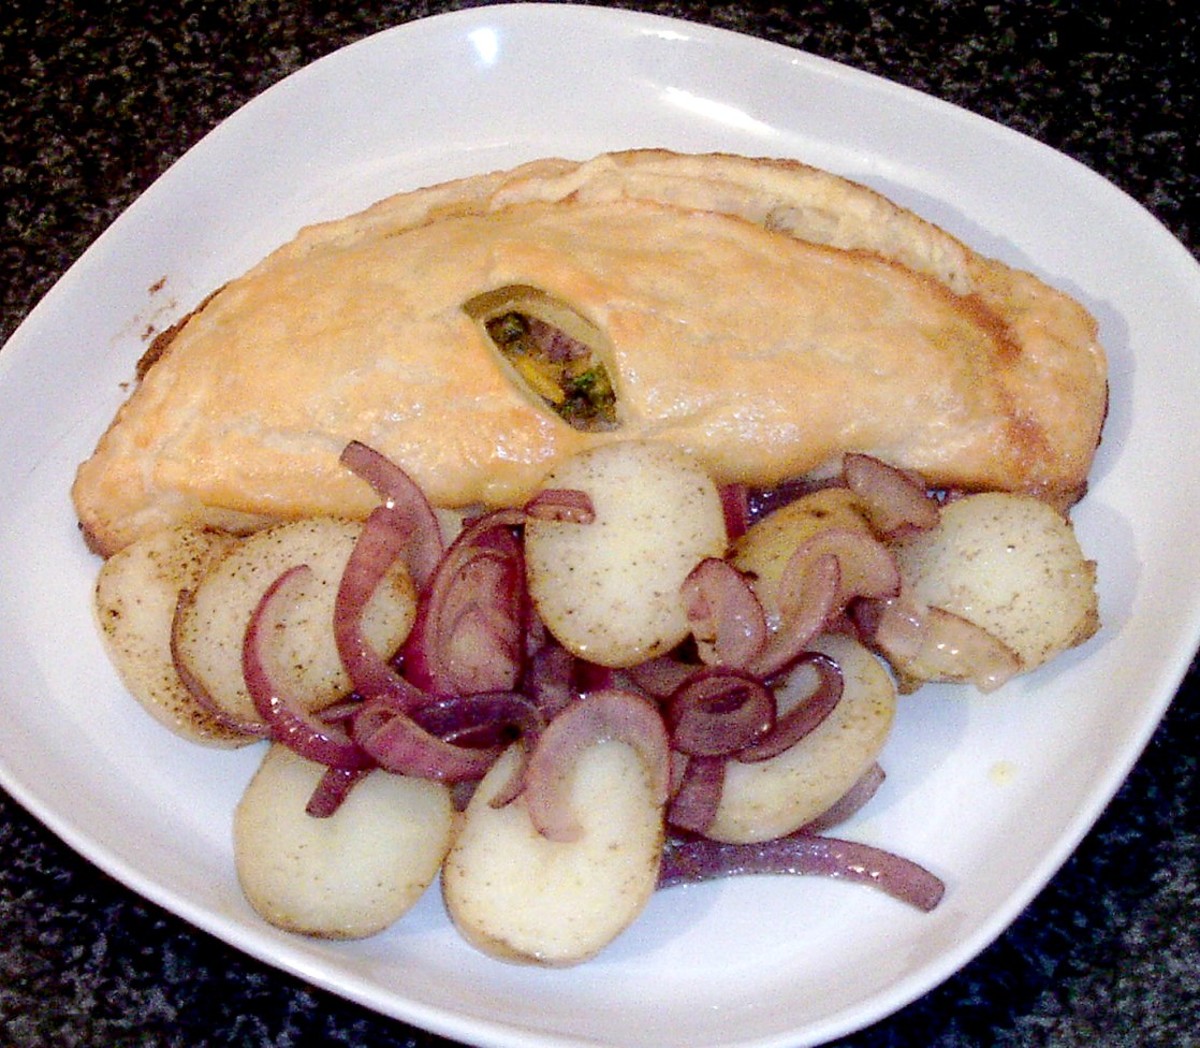 Sea bass en croute and sauteed potato and onions are plated.